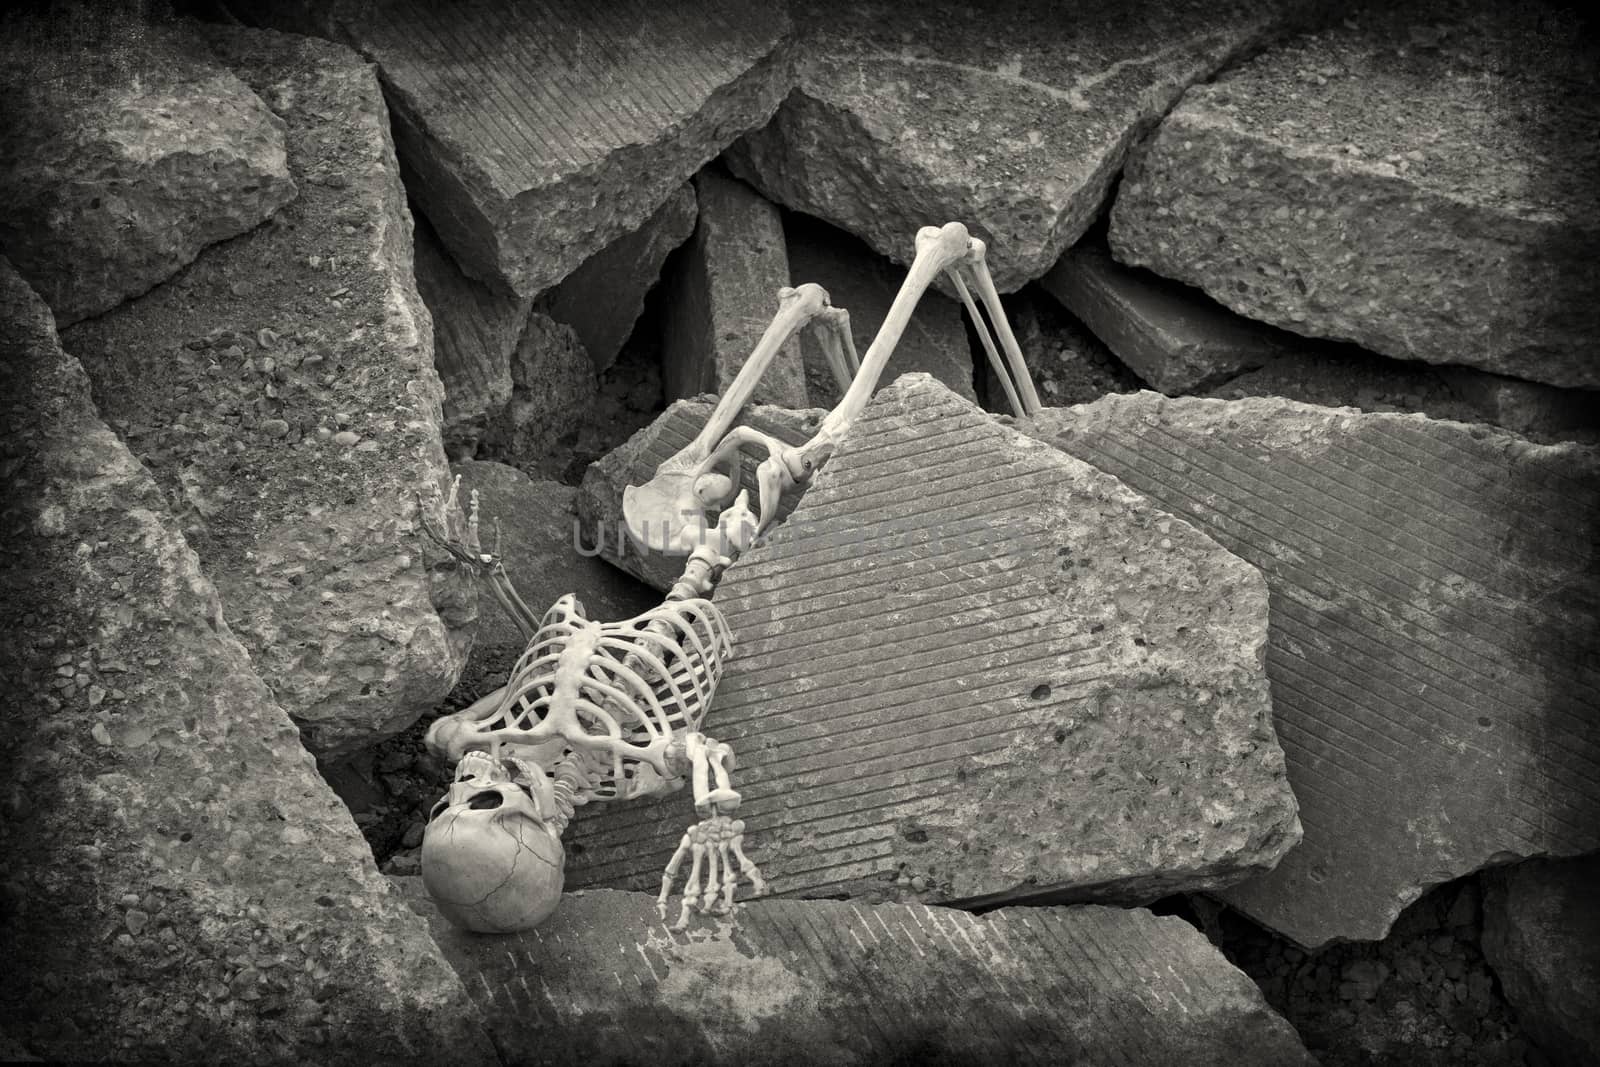 A apocalyptic skeleton rests amongst the rubble of a collapsed building.